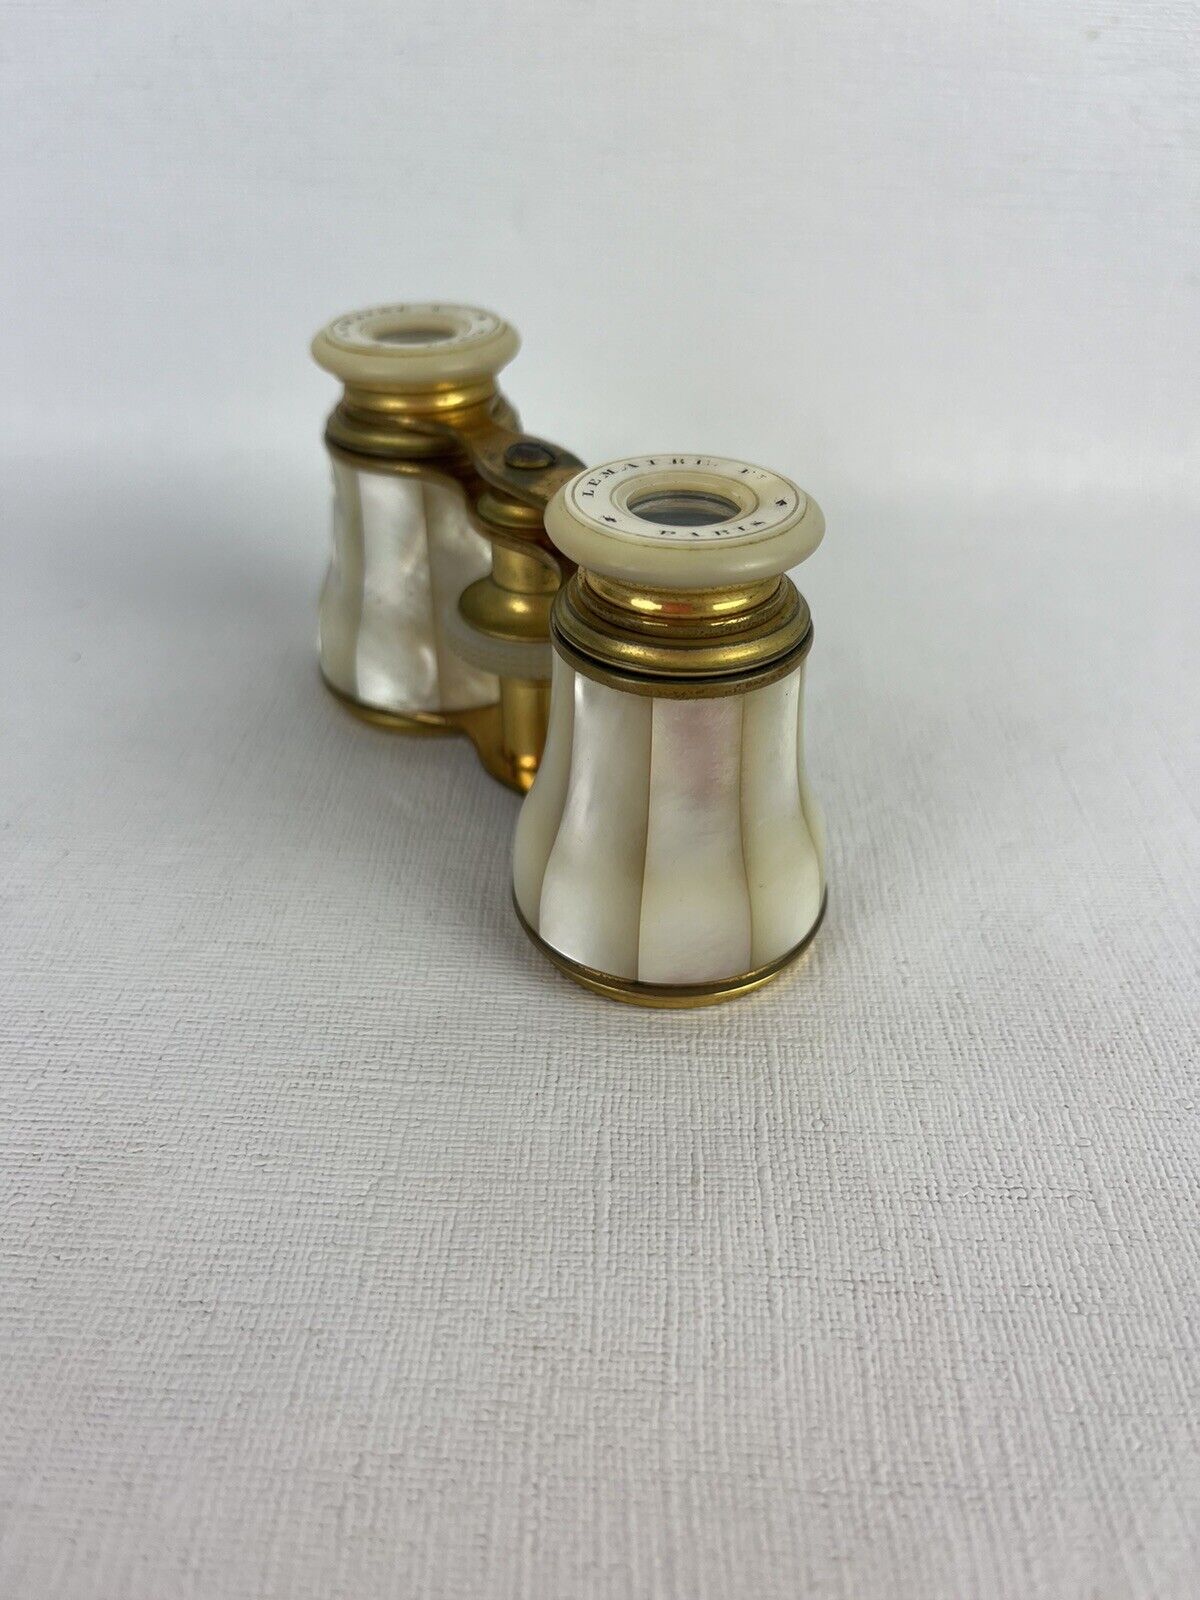 Antique Mother of Pearl Brass Opera Glasses With Original Case Lemaire FI Paris